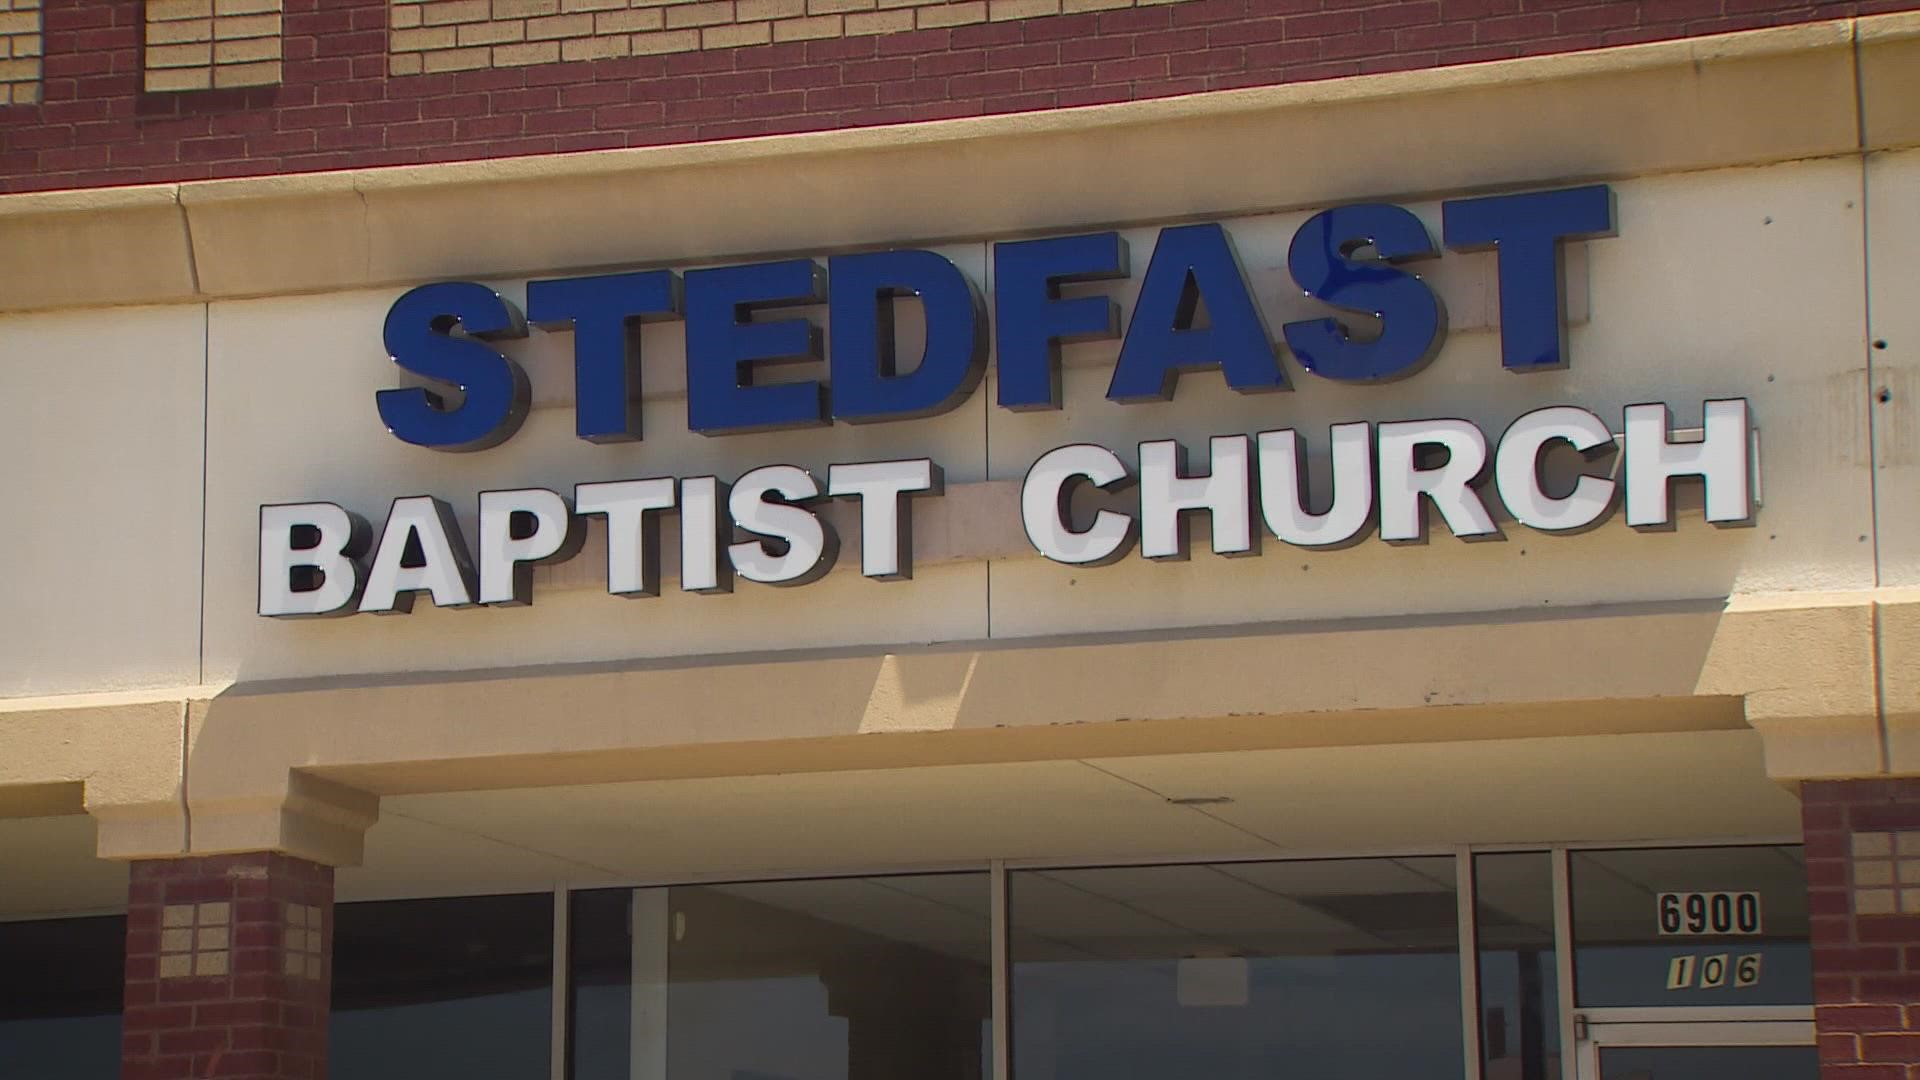 A pastor at the Stedfast Baptist Church in Tarrant County told his congregation that gay people should be lined up and shot.